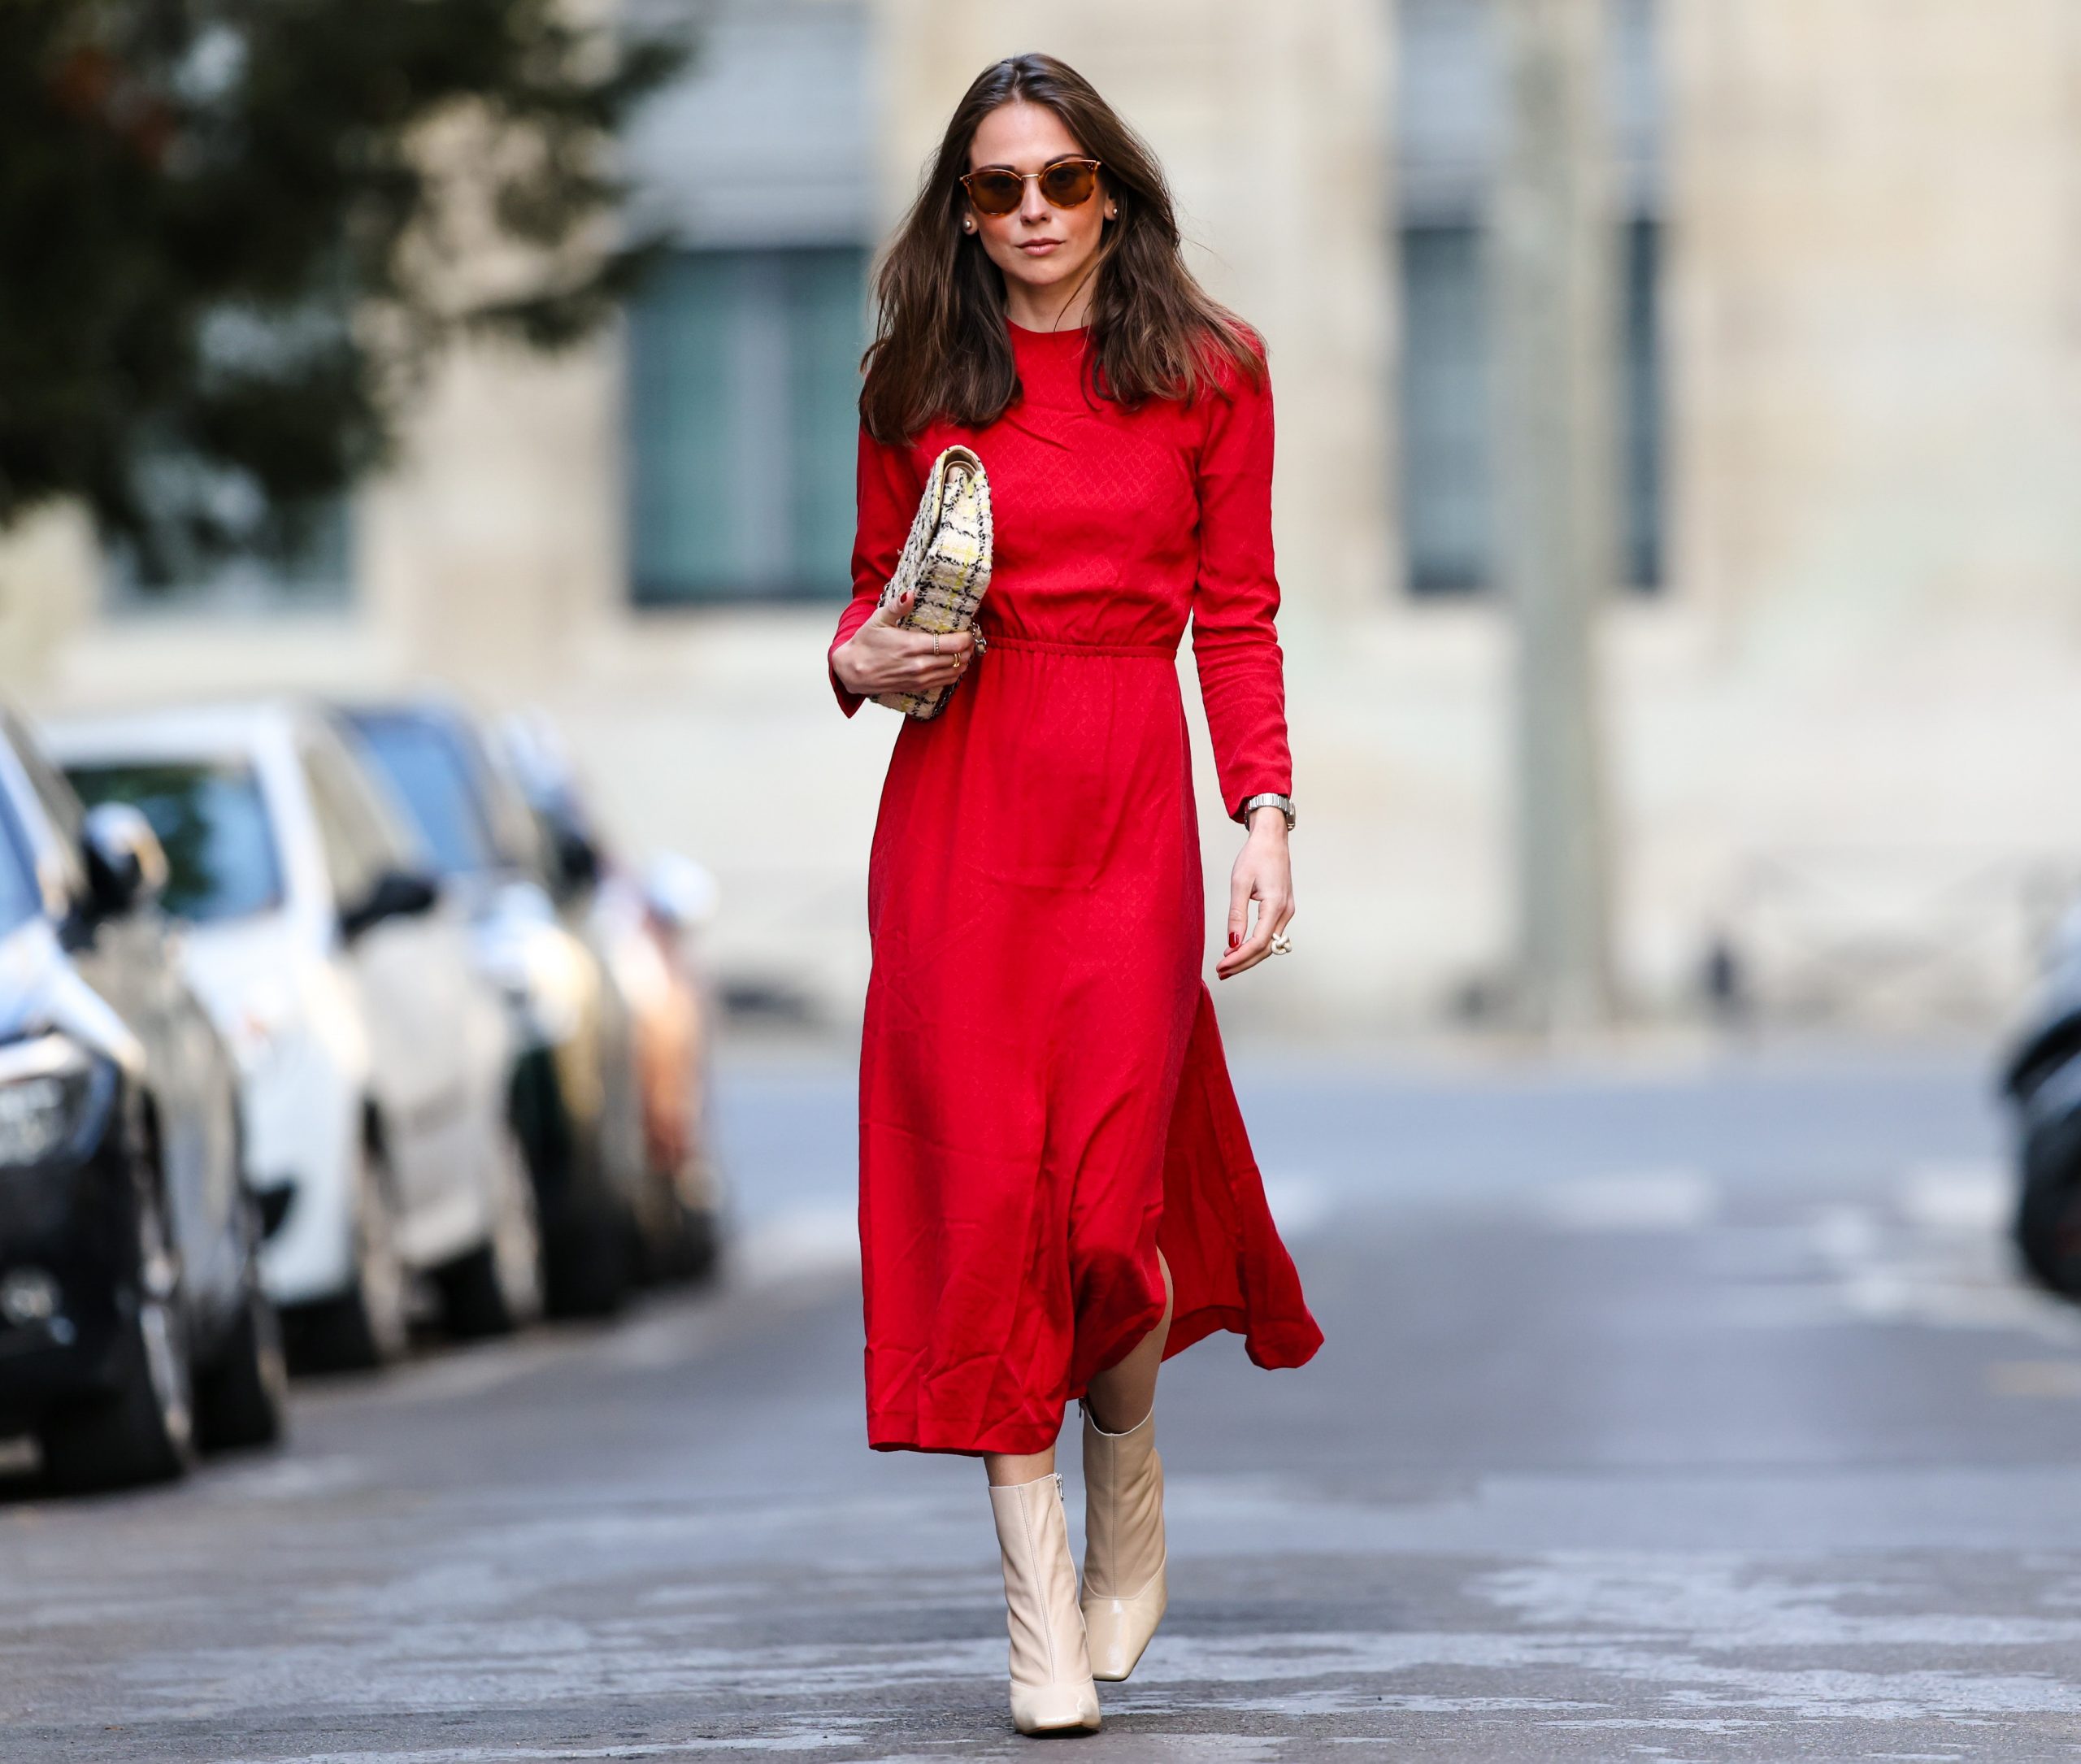 What to mix red color with to look not only sexy but also stylish?